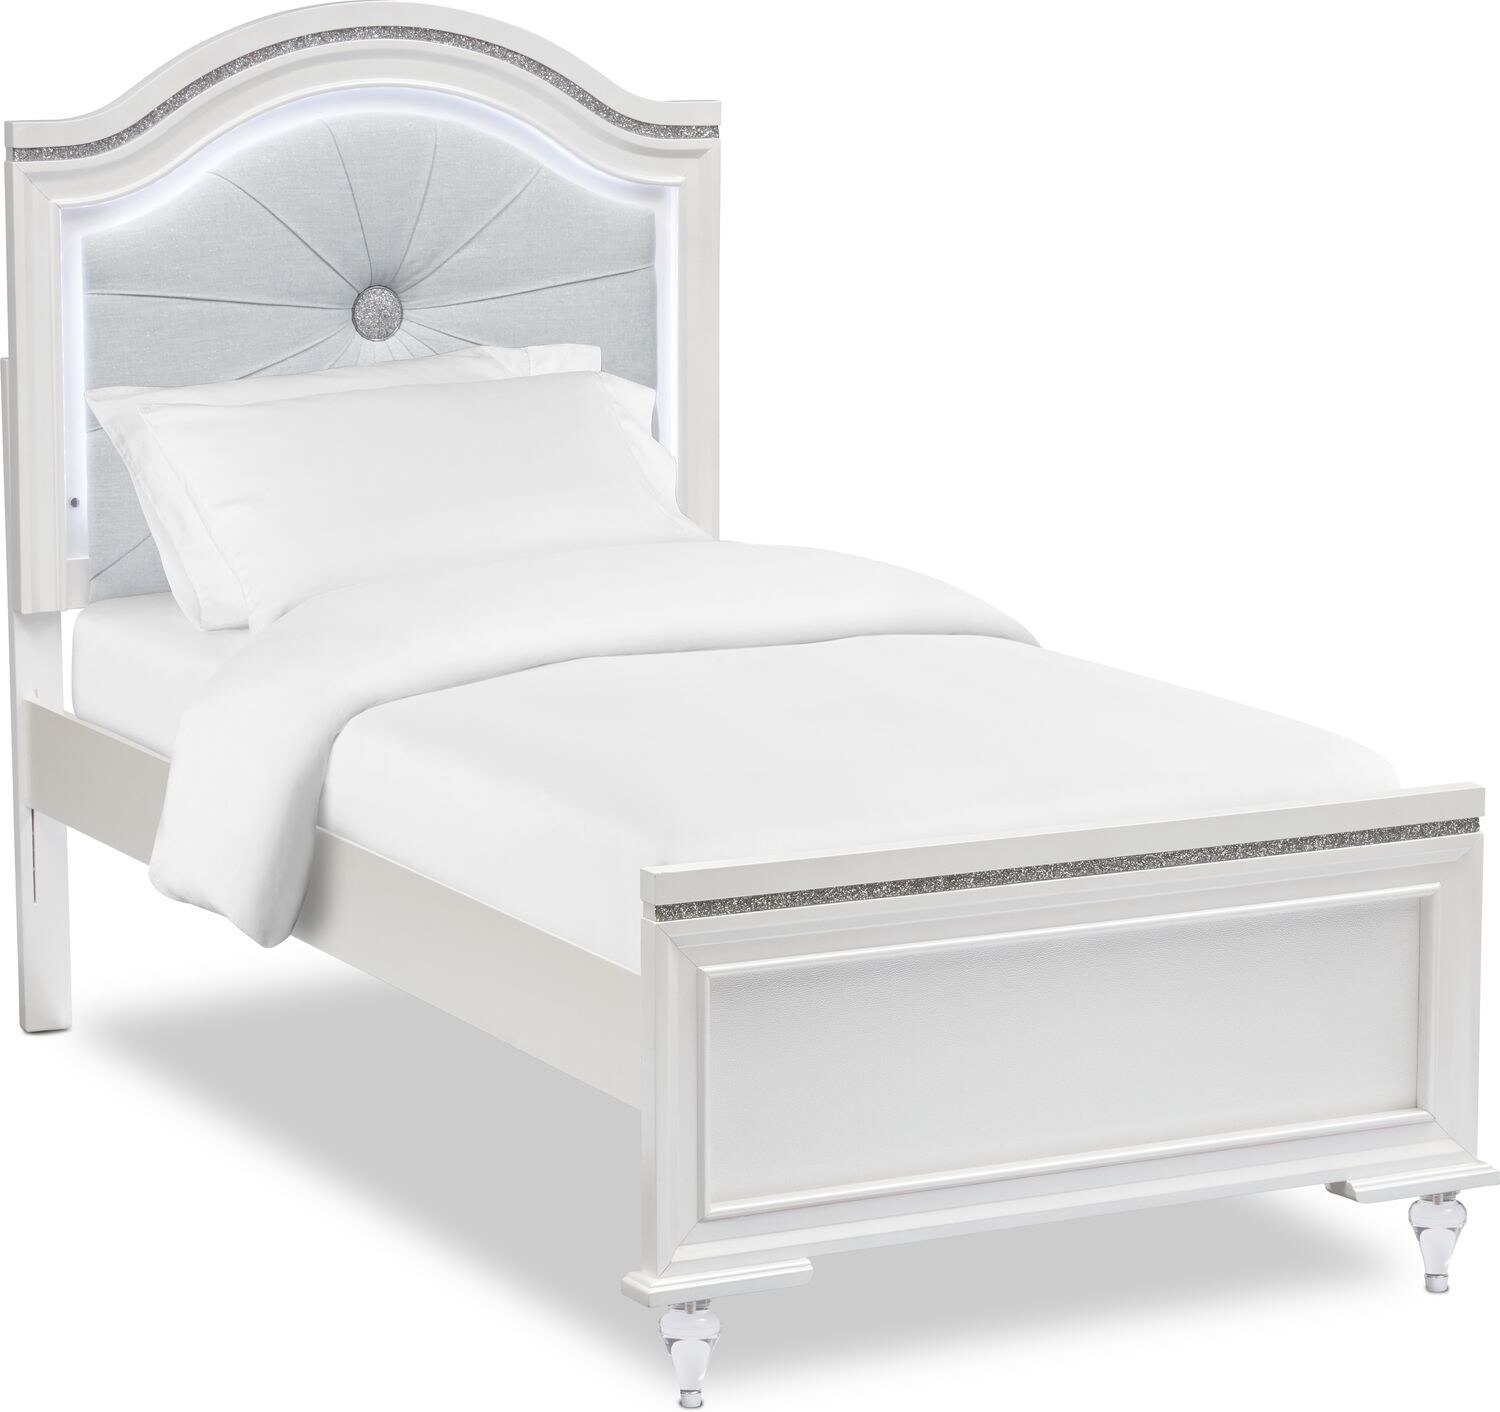 value city twin bed sets